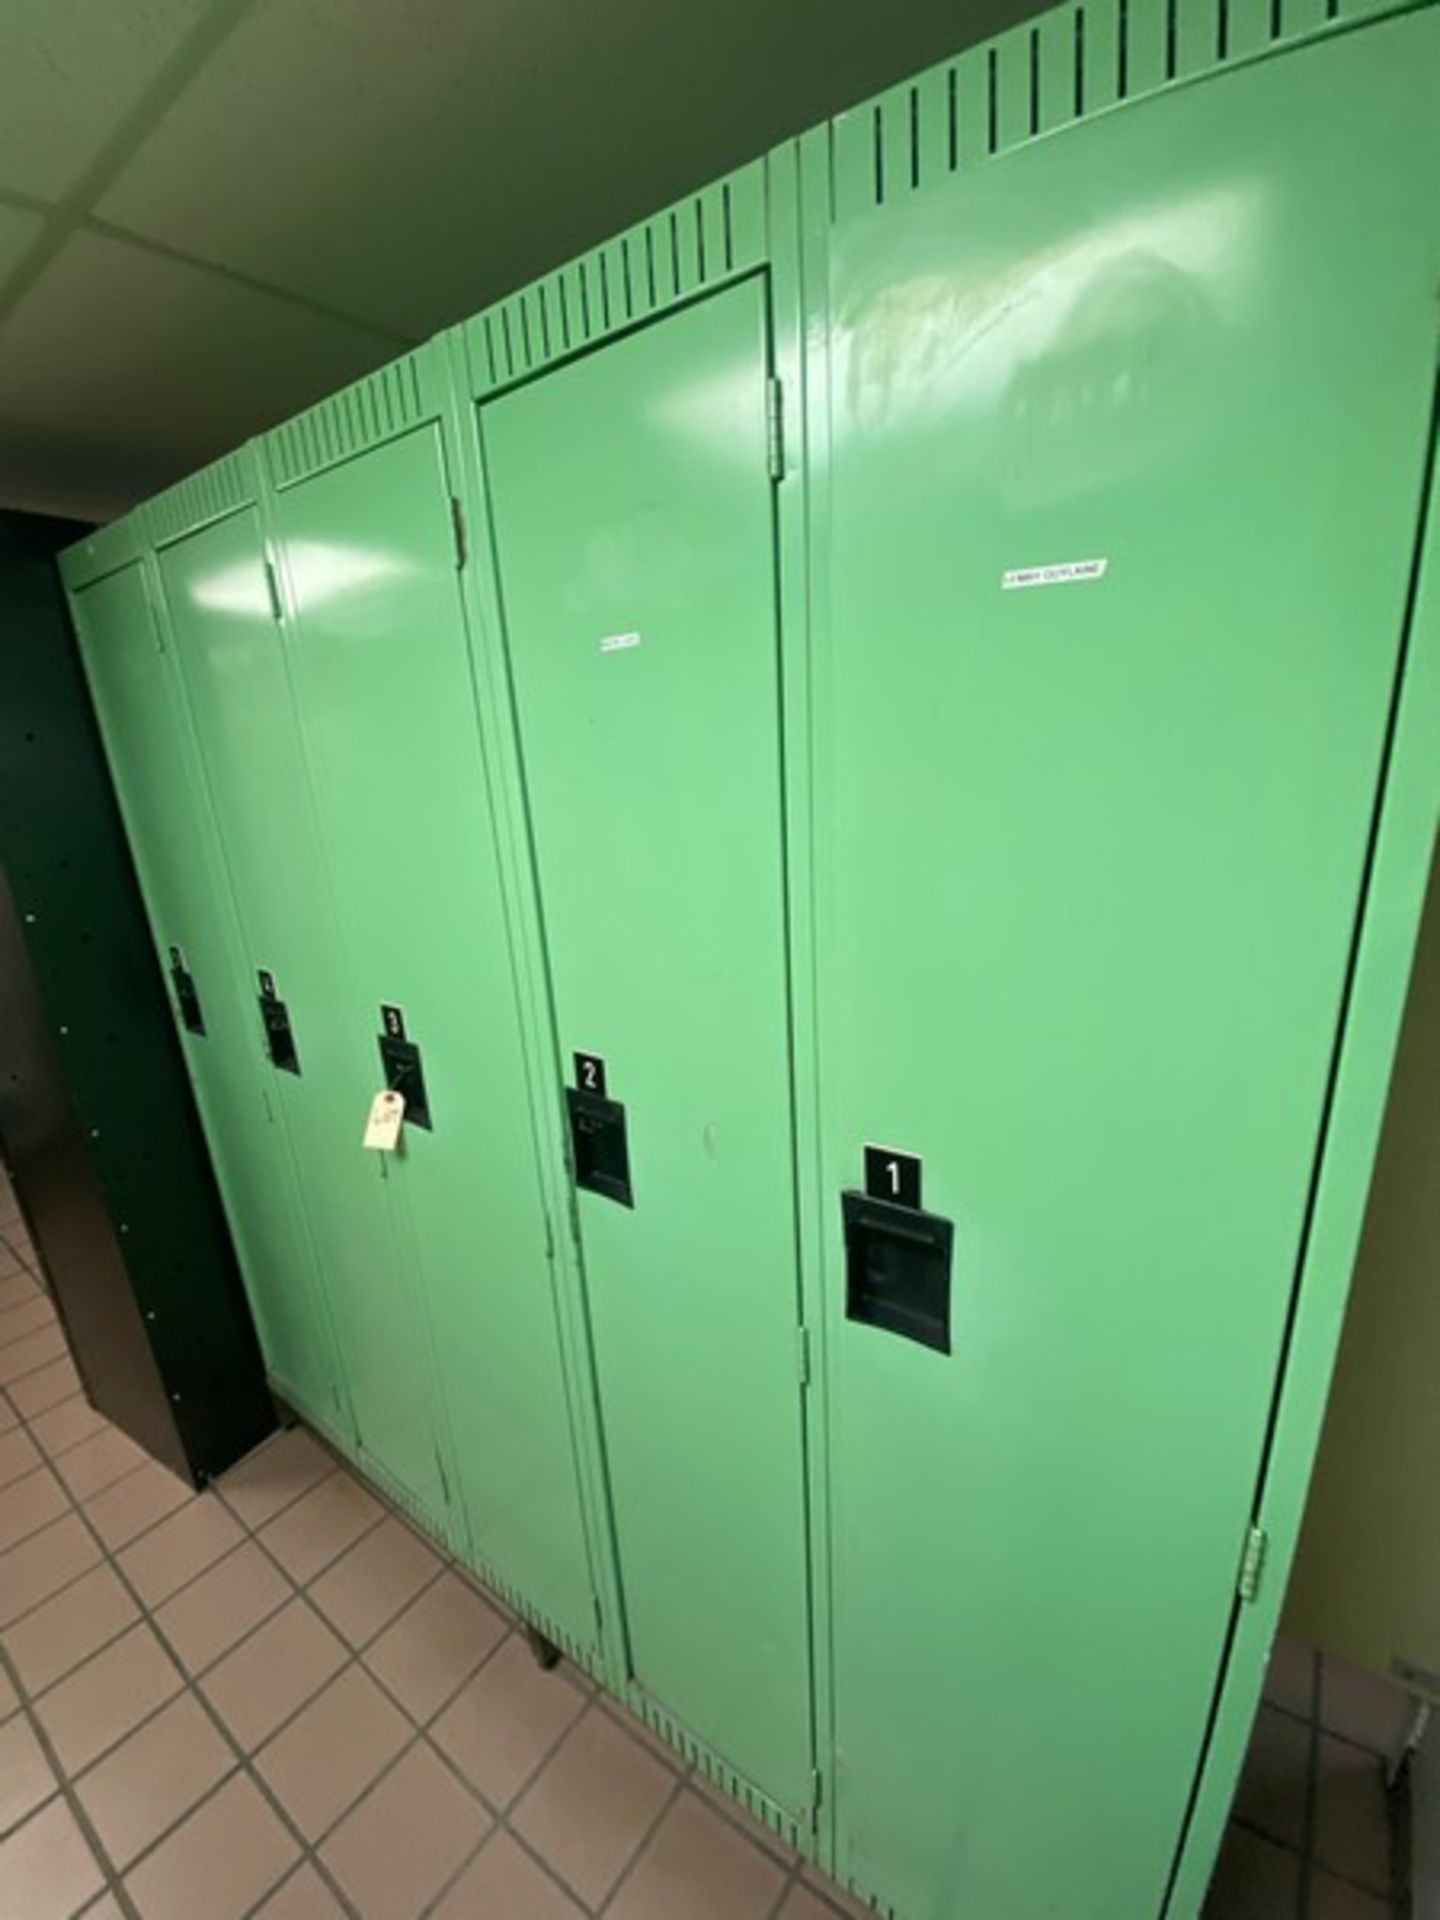 1-Section of Lockers, Includes (5) Lockers (LOCATED IN SAINT-LAMBERT, QC) - Image 2 of 2